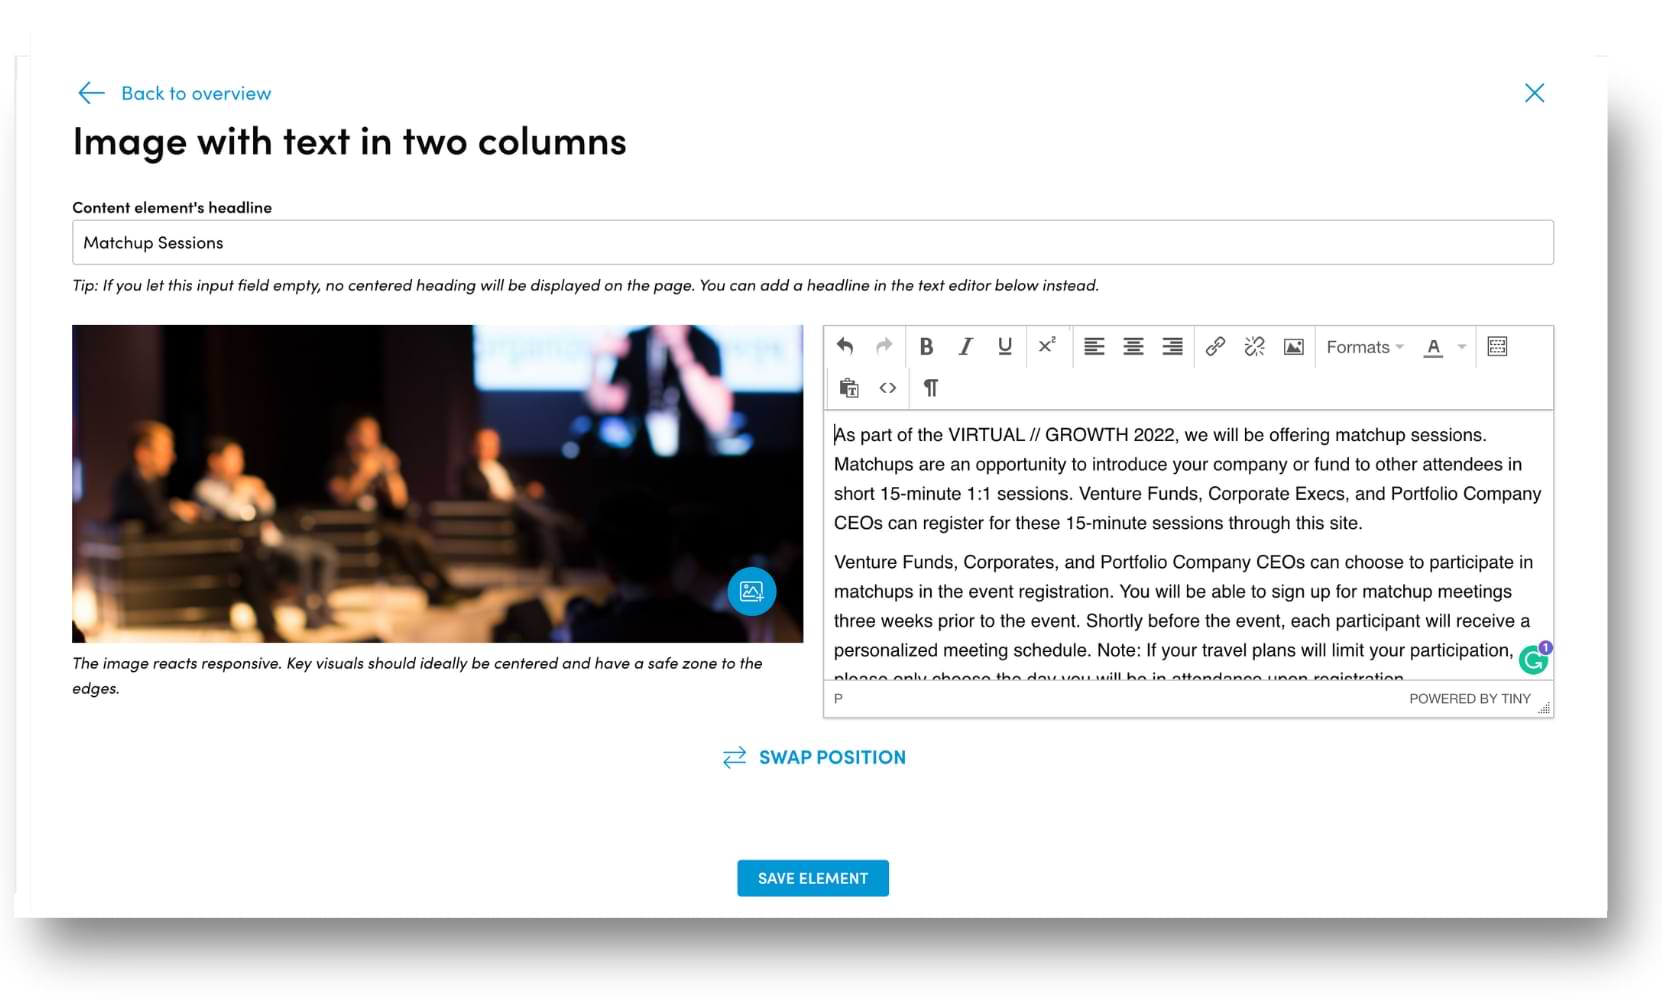 image and text added to the landing page element